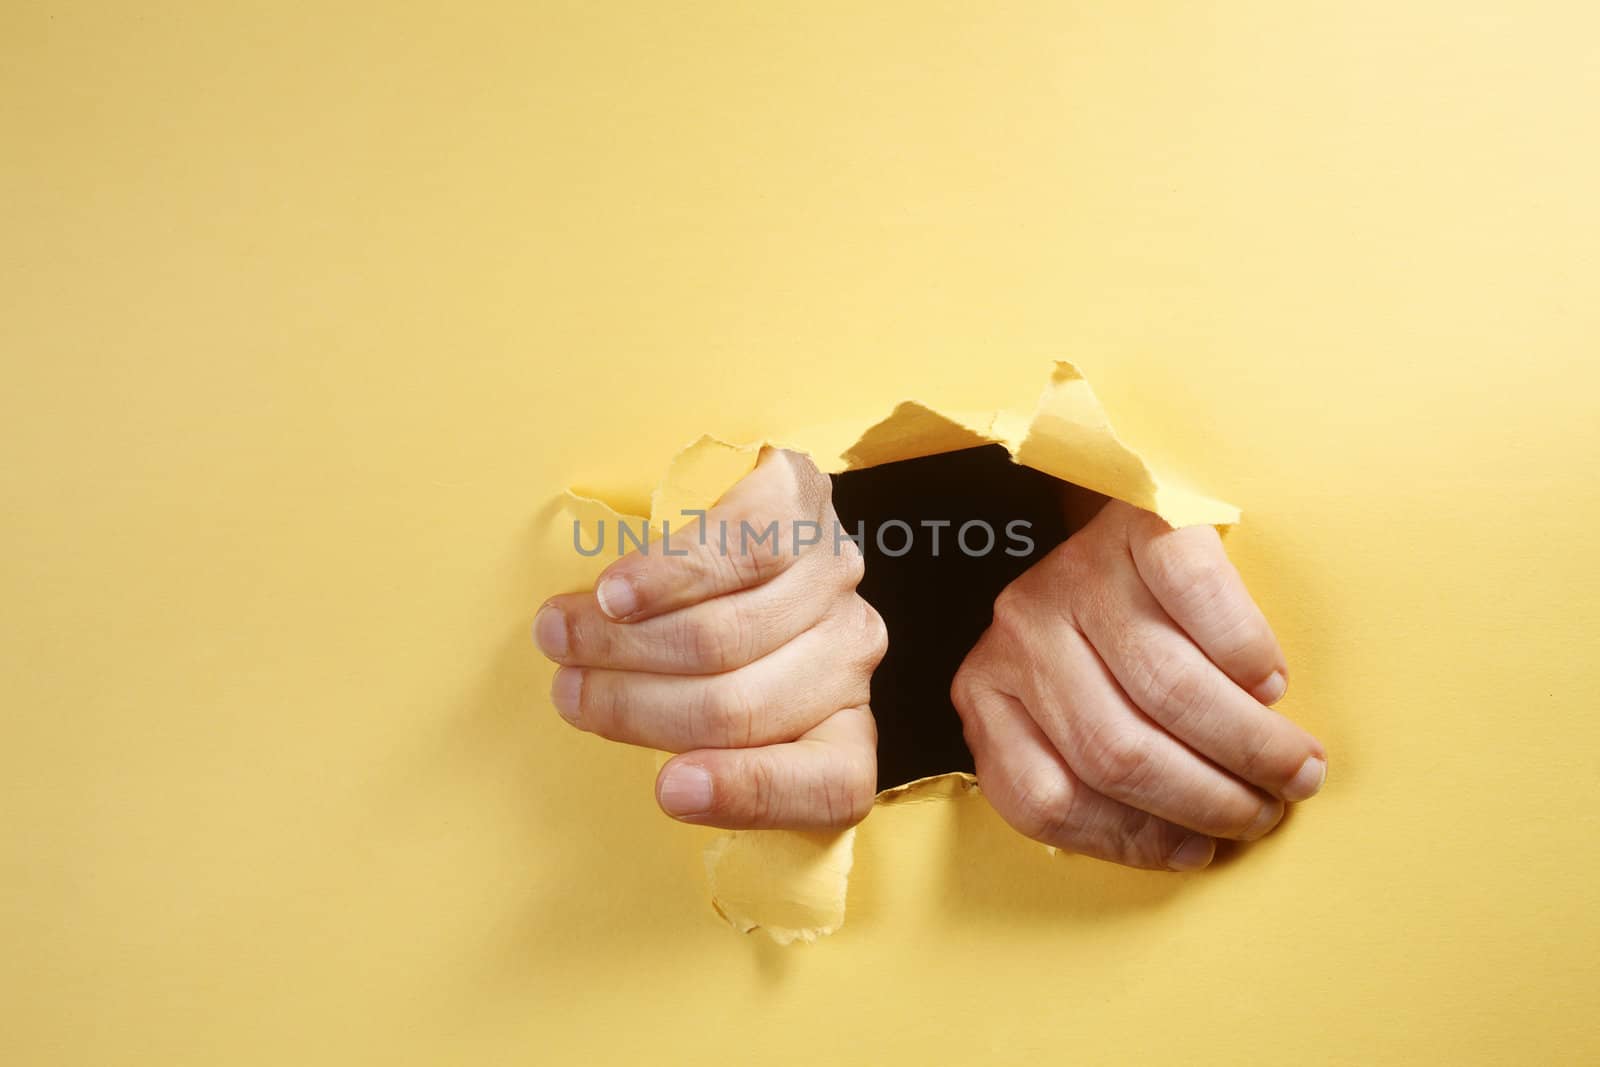 stock image of the hands breaking through a hole